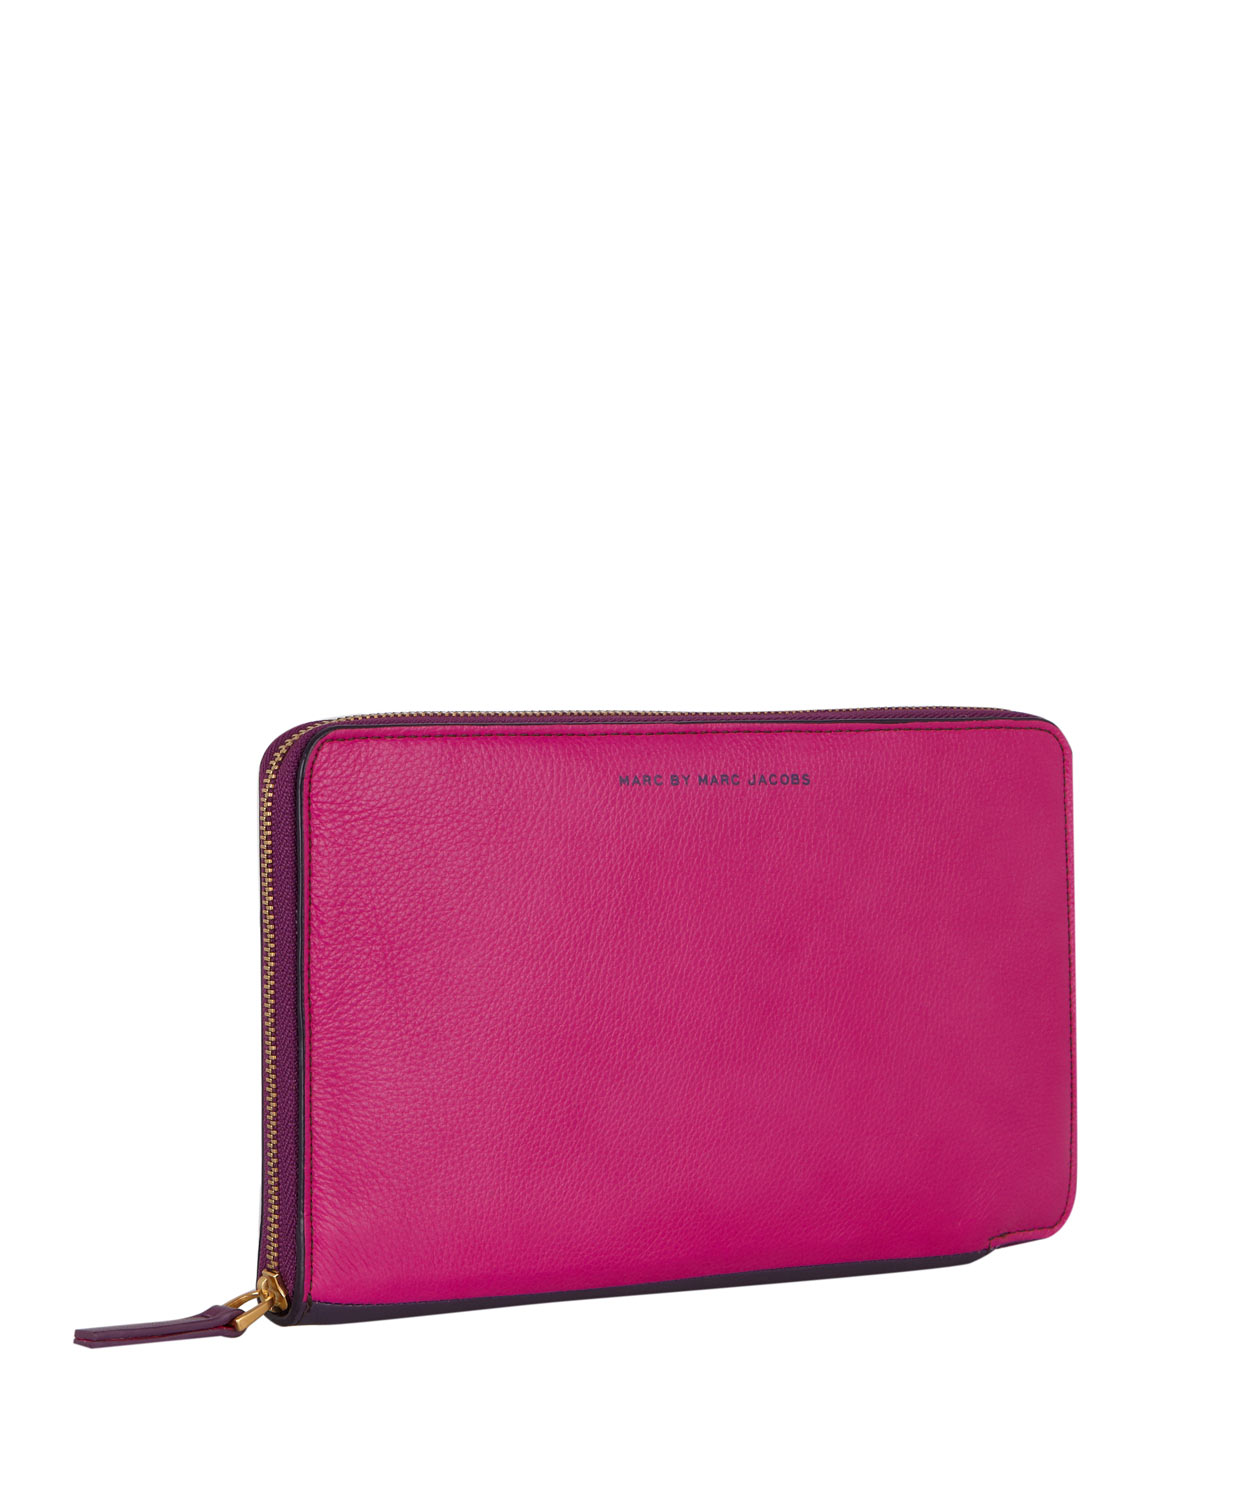 Lyst - Marc By Marc Jacobs Pink Sophisticato Leather Travel Wallet in ...